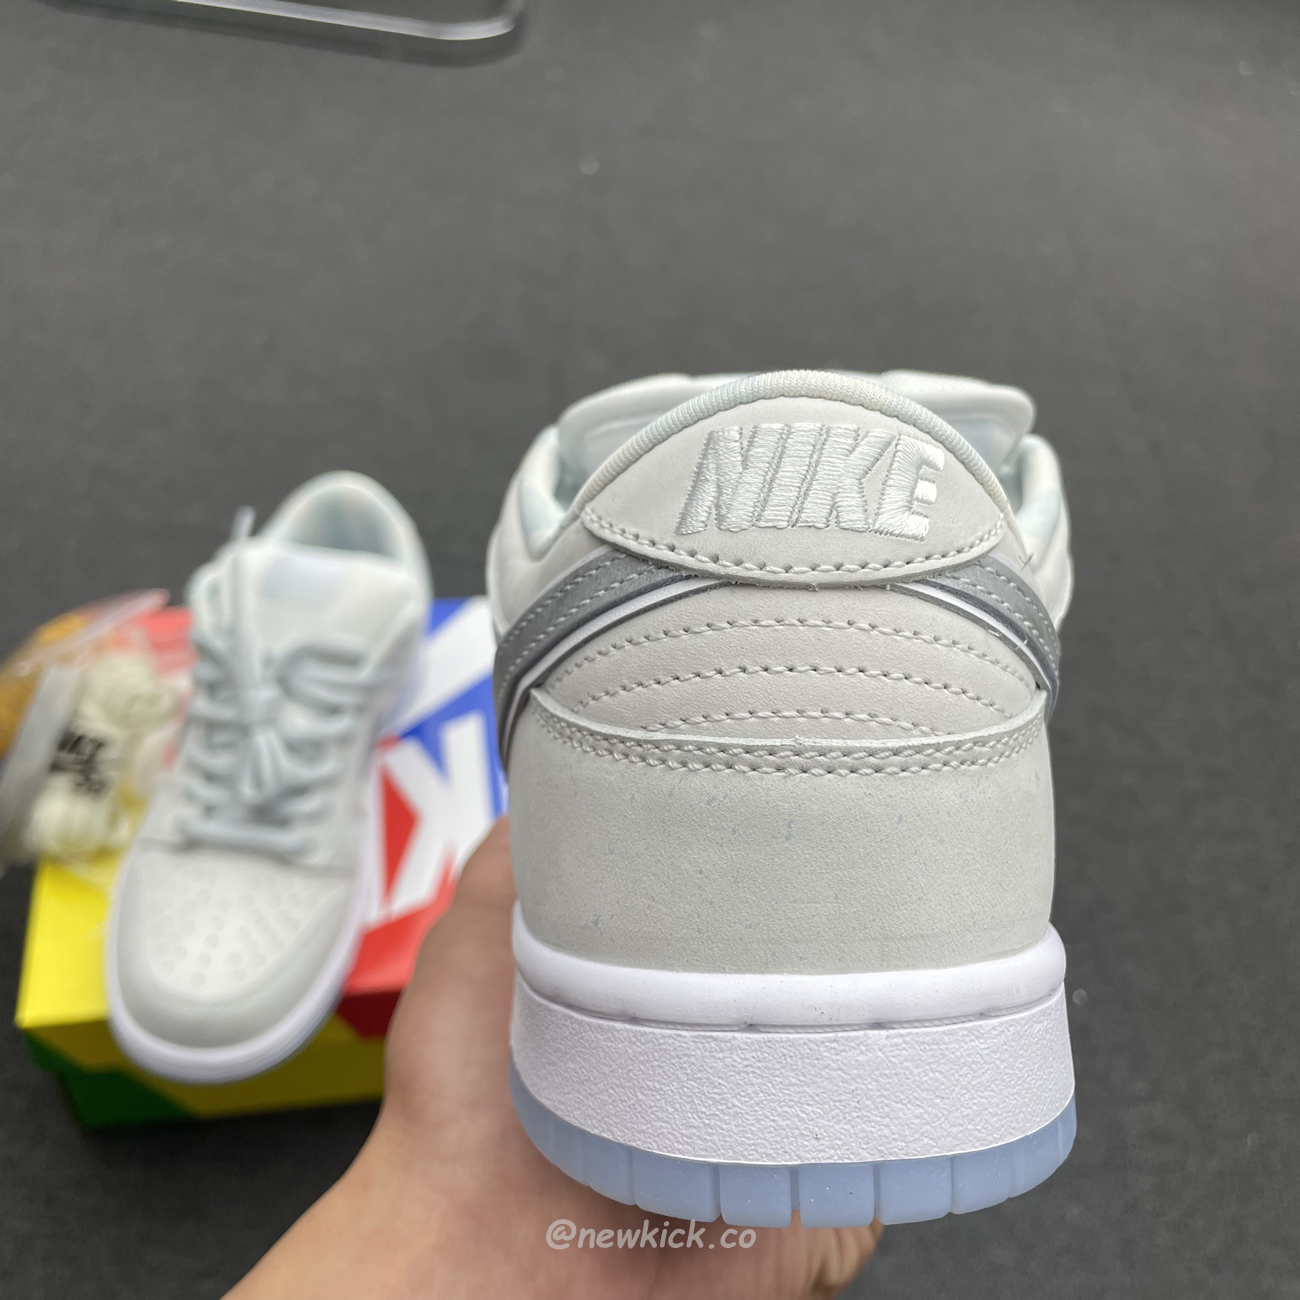 Nike Sb Dunk Low White Lobster Friends And Family Fd8776 100 (7) - newkick.org